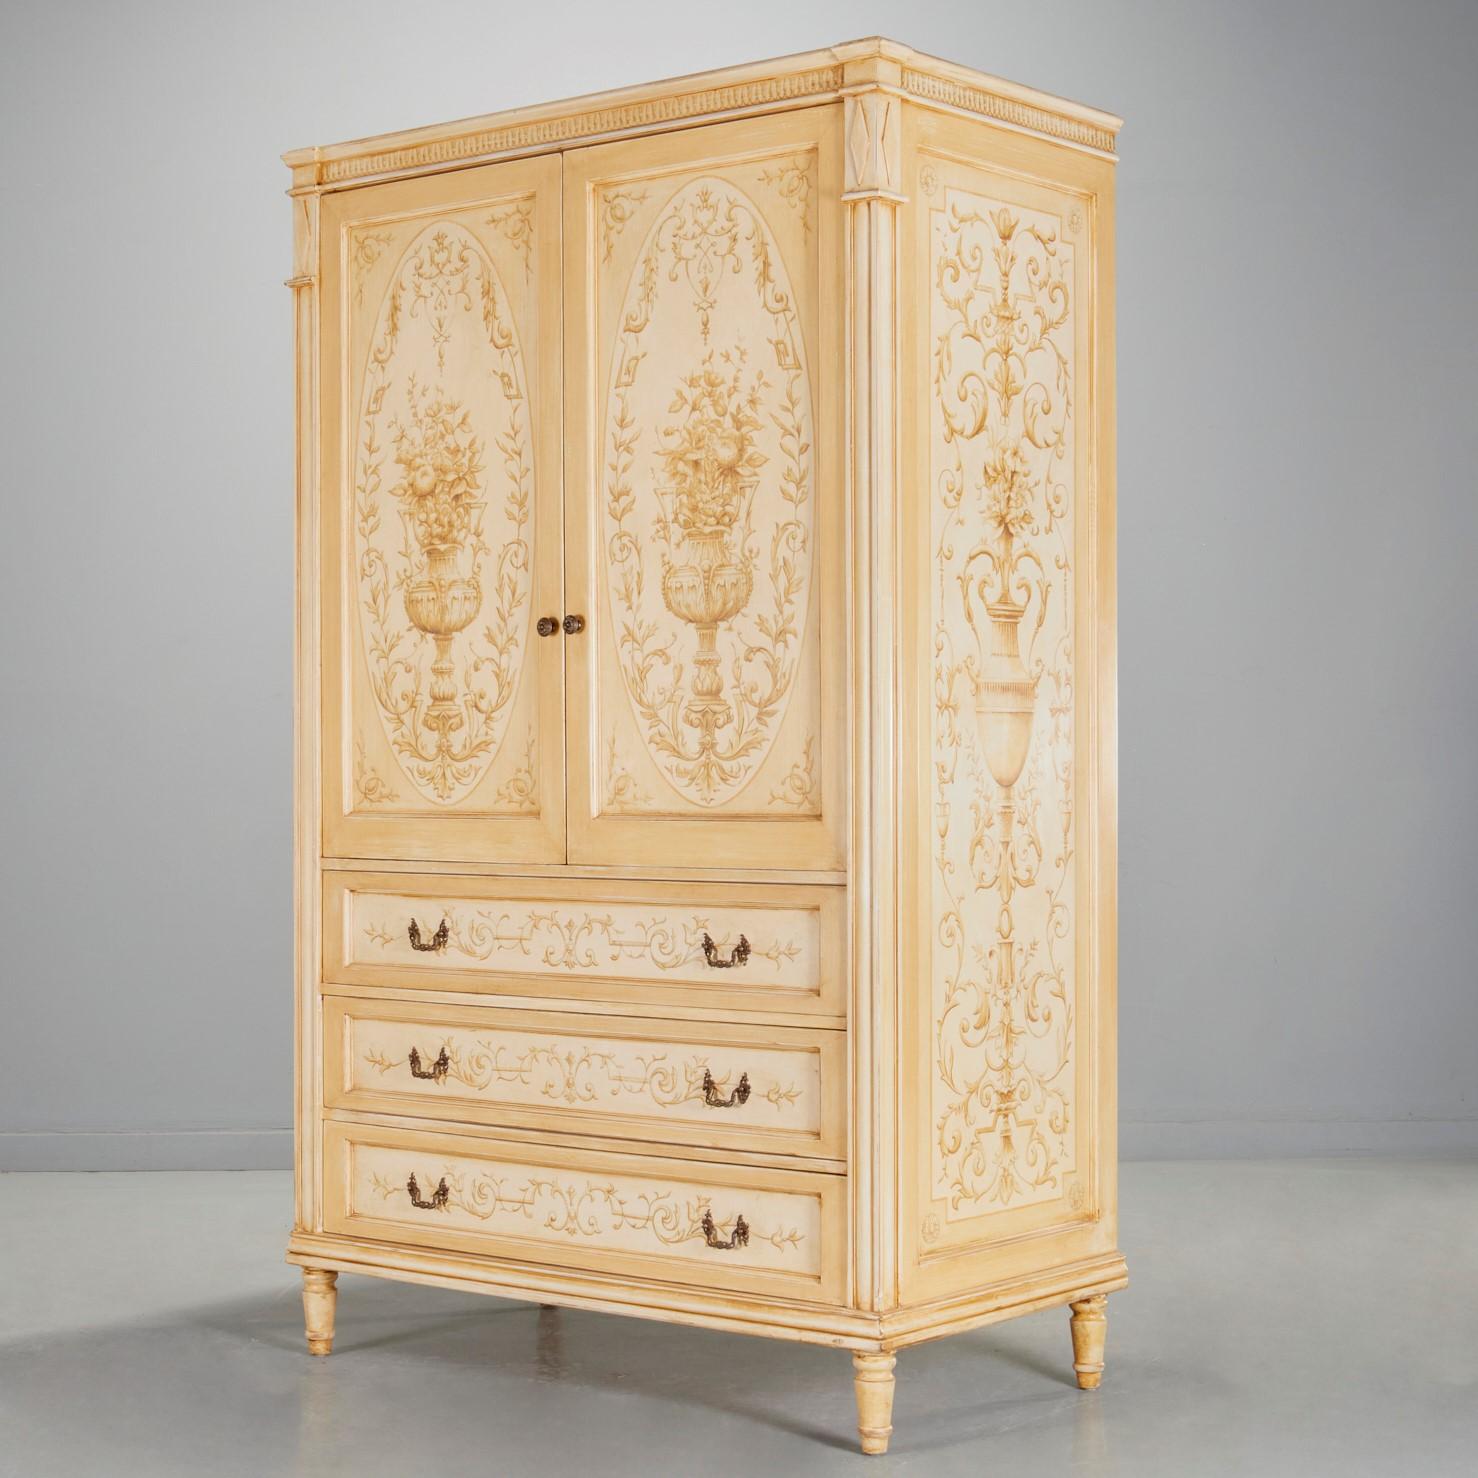 Custom Hand Painted Louis XVI Style Armoire by Ned Marshall Interiors, Inc. For Sale 5